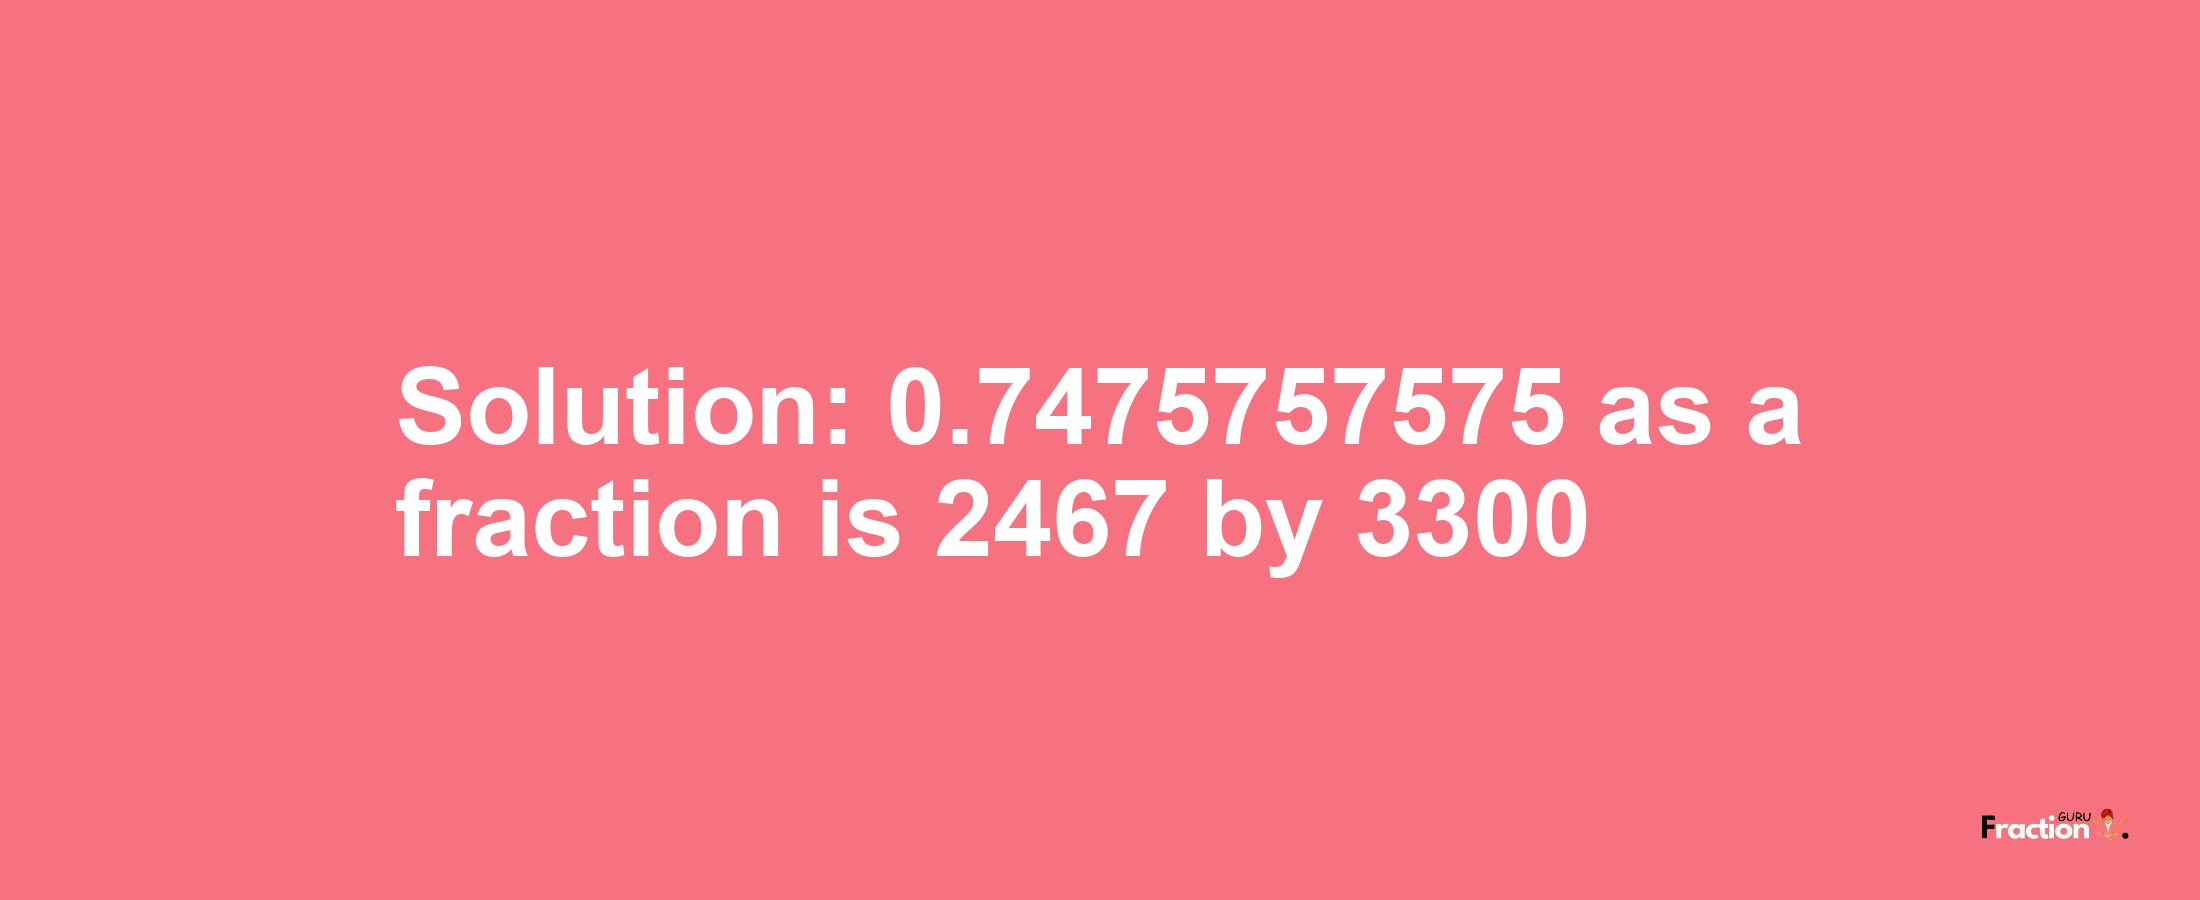 Solution:0.7475757575 as a fraction is 2467/3300